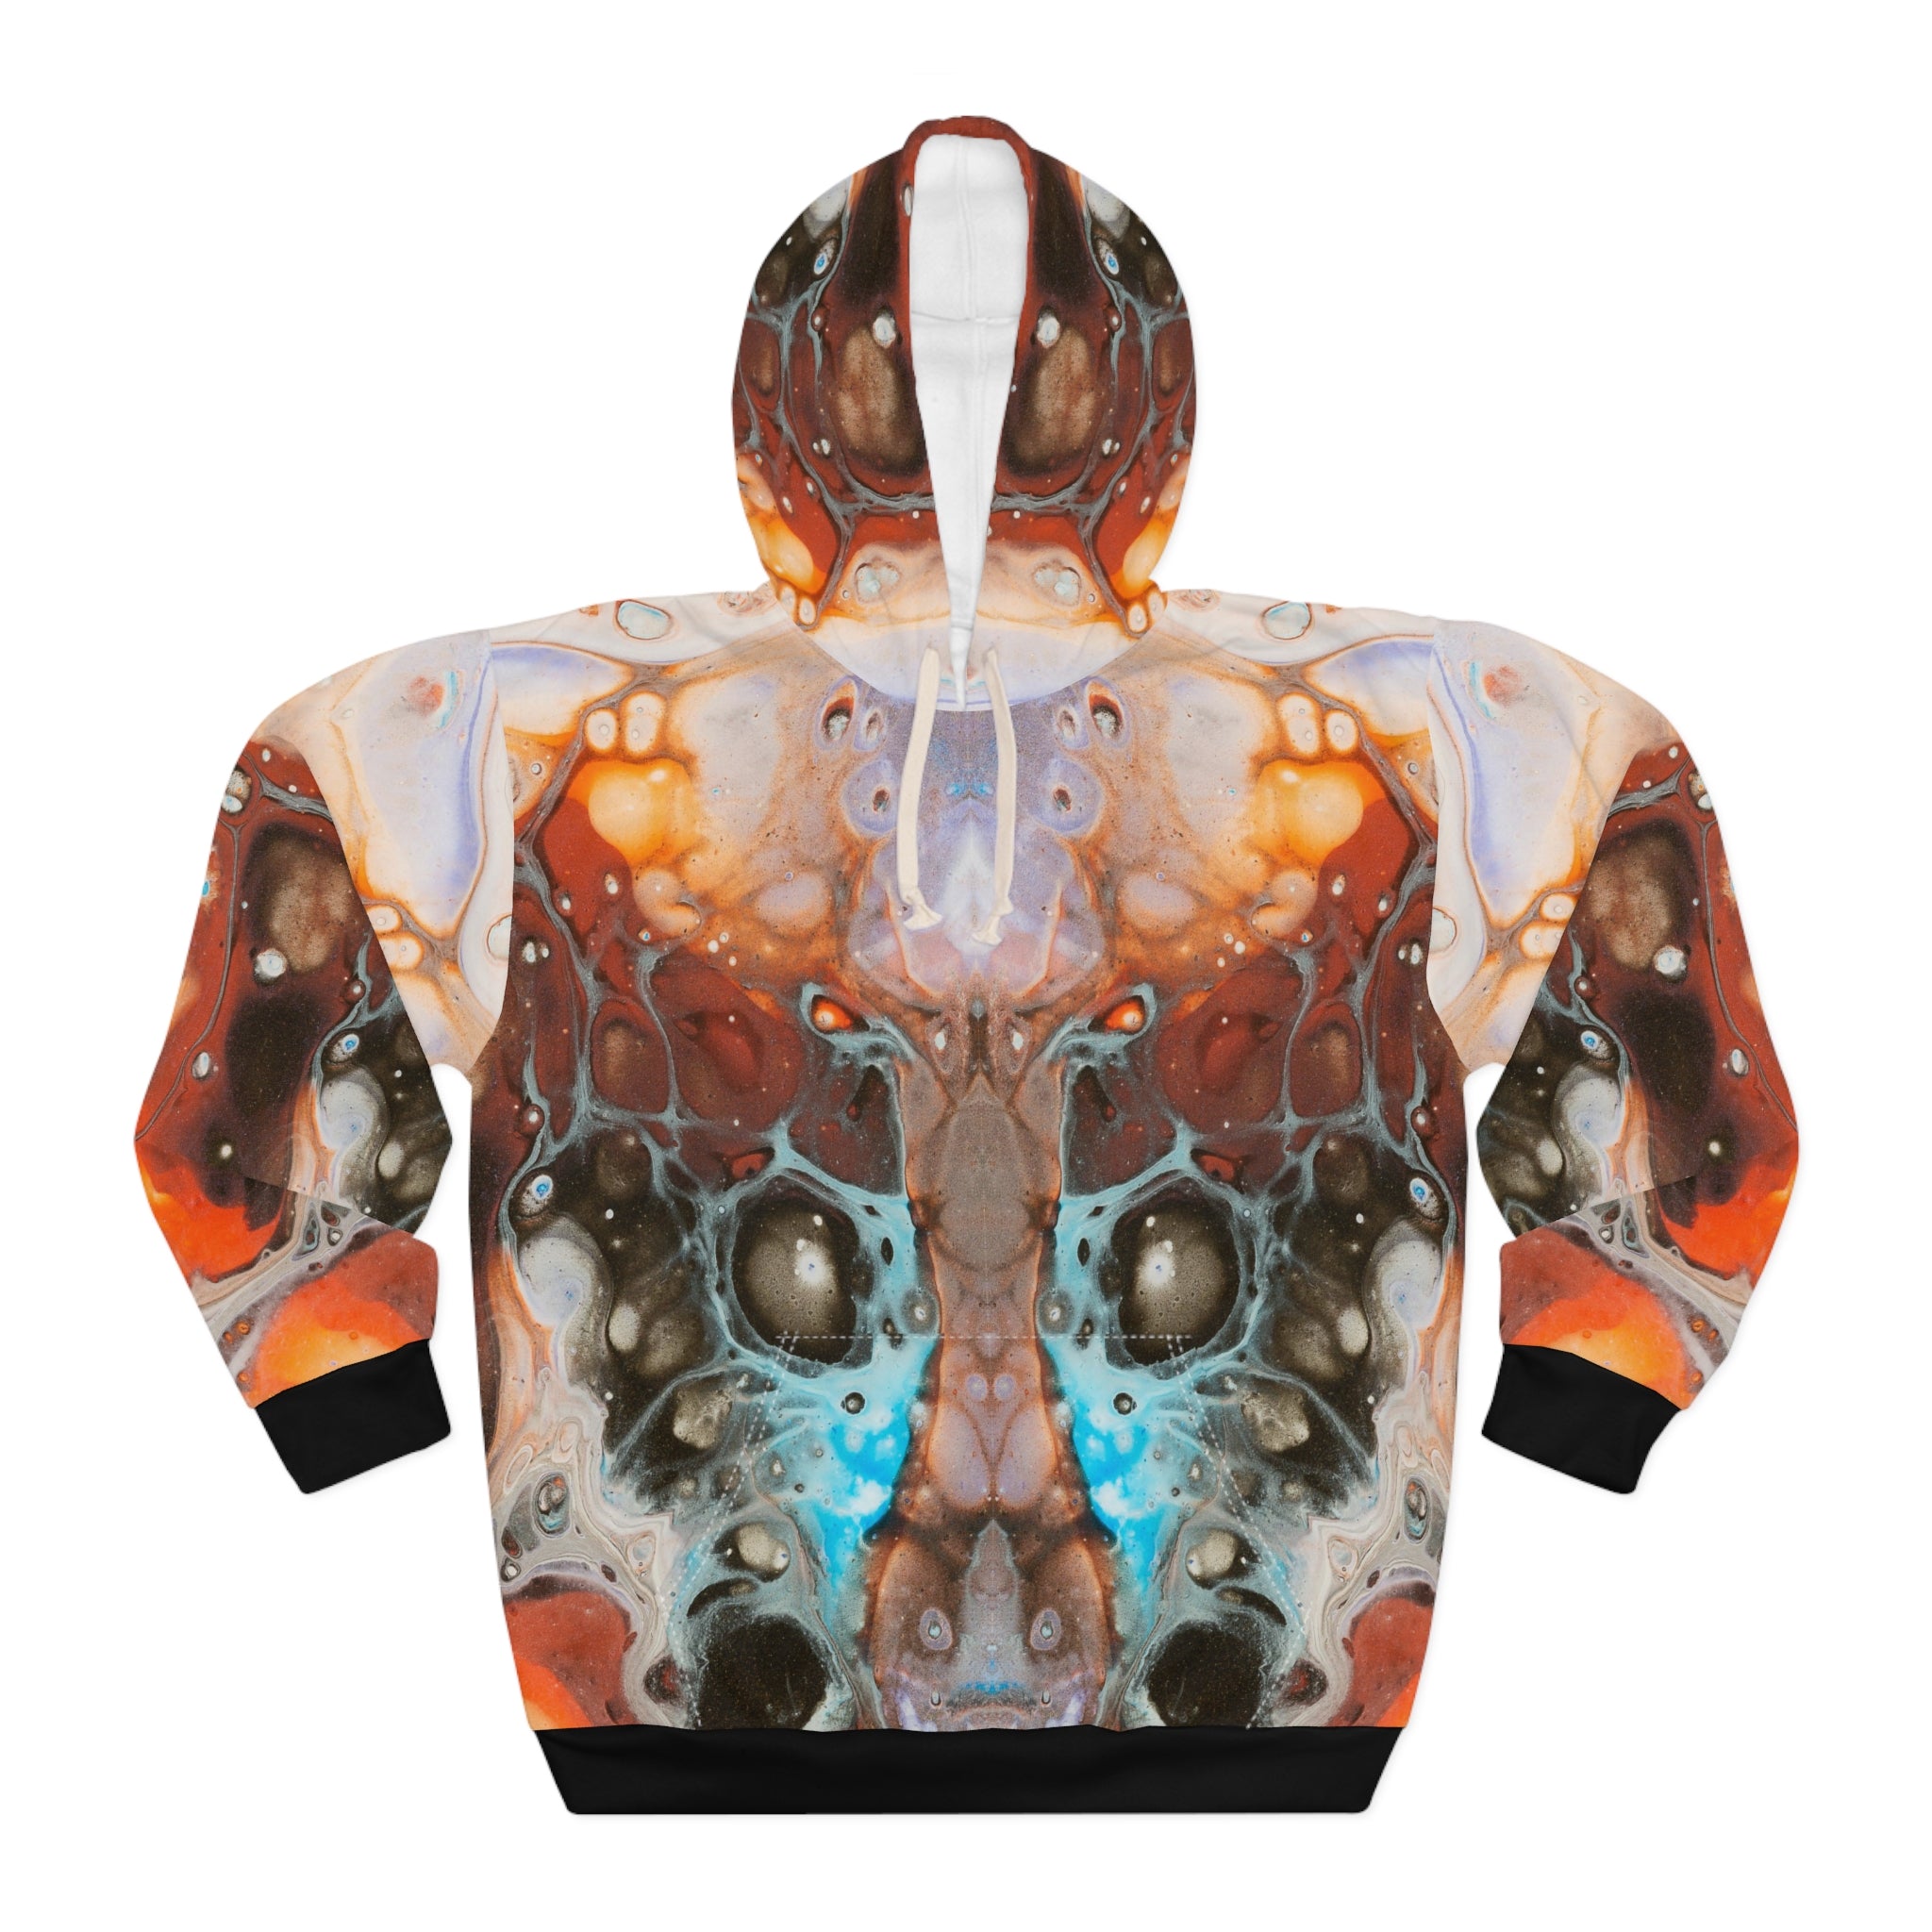 Cameron Creations - Galactic Mask - Pullover Hoodie - Front